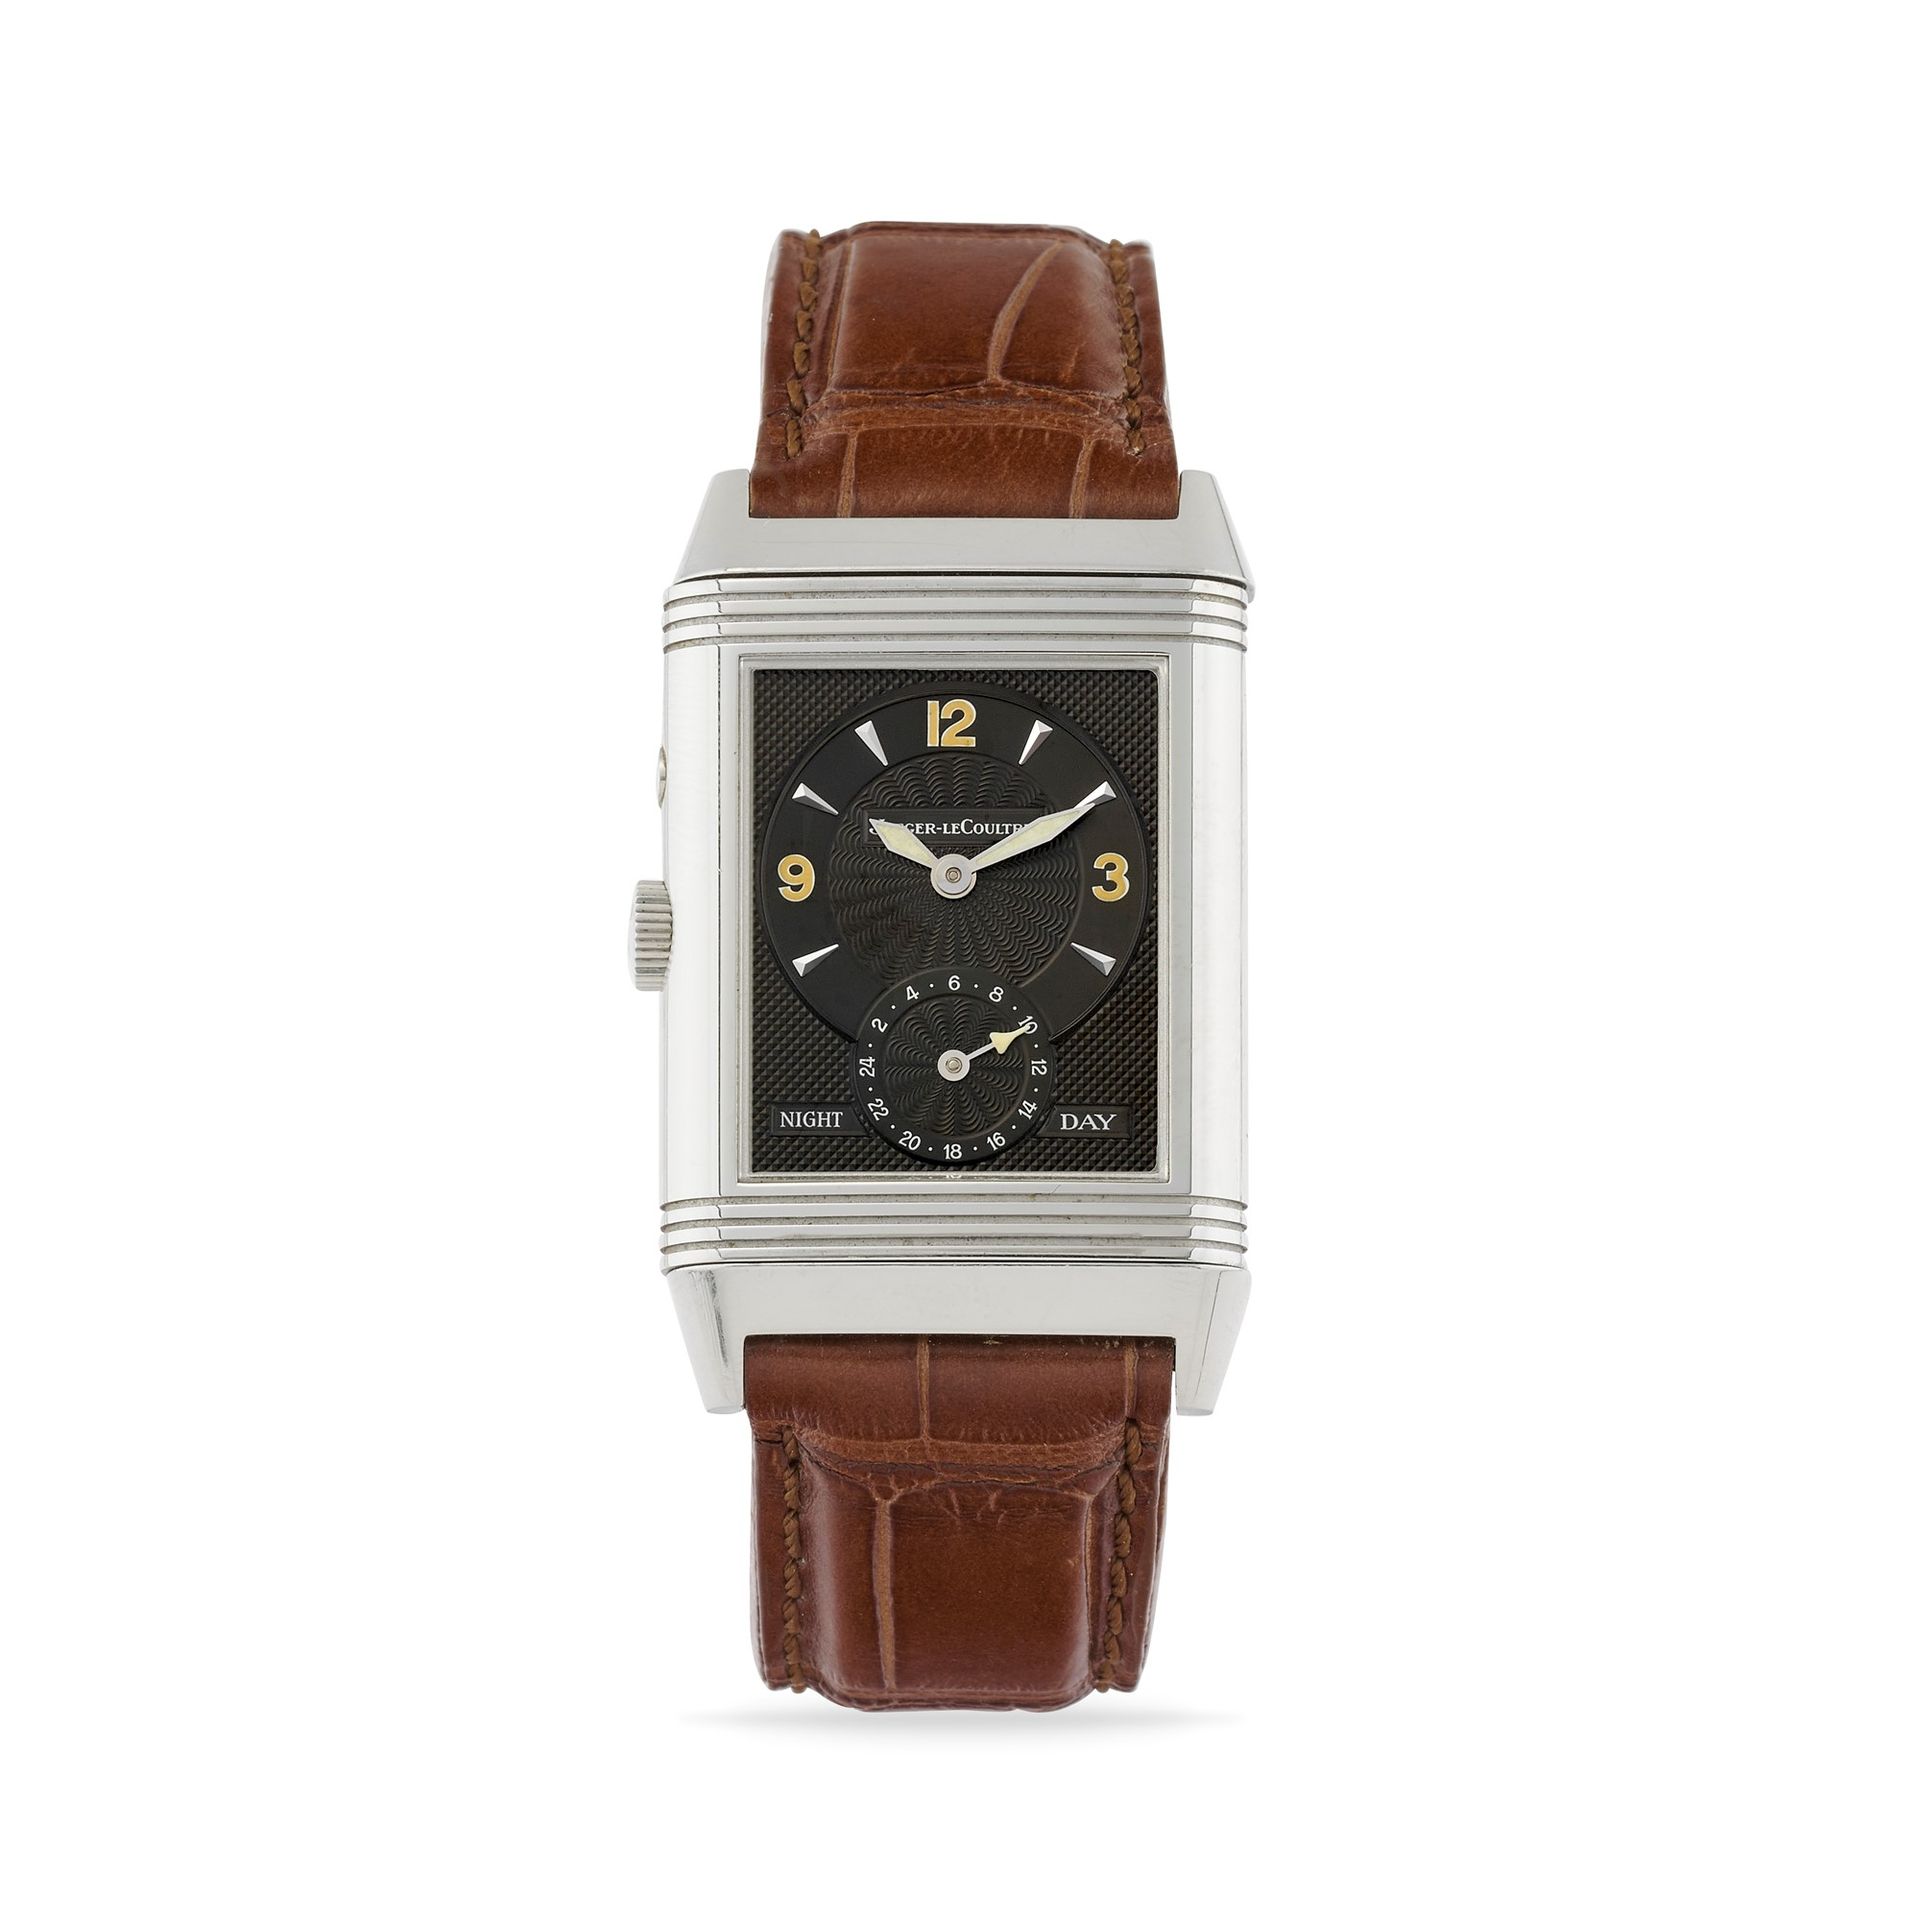 JAEGER-LECOULTRE Jaeger-LeCoultre Reverso Duoface Night & Day 270854, años 90 

&hellip;